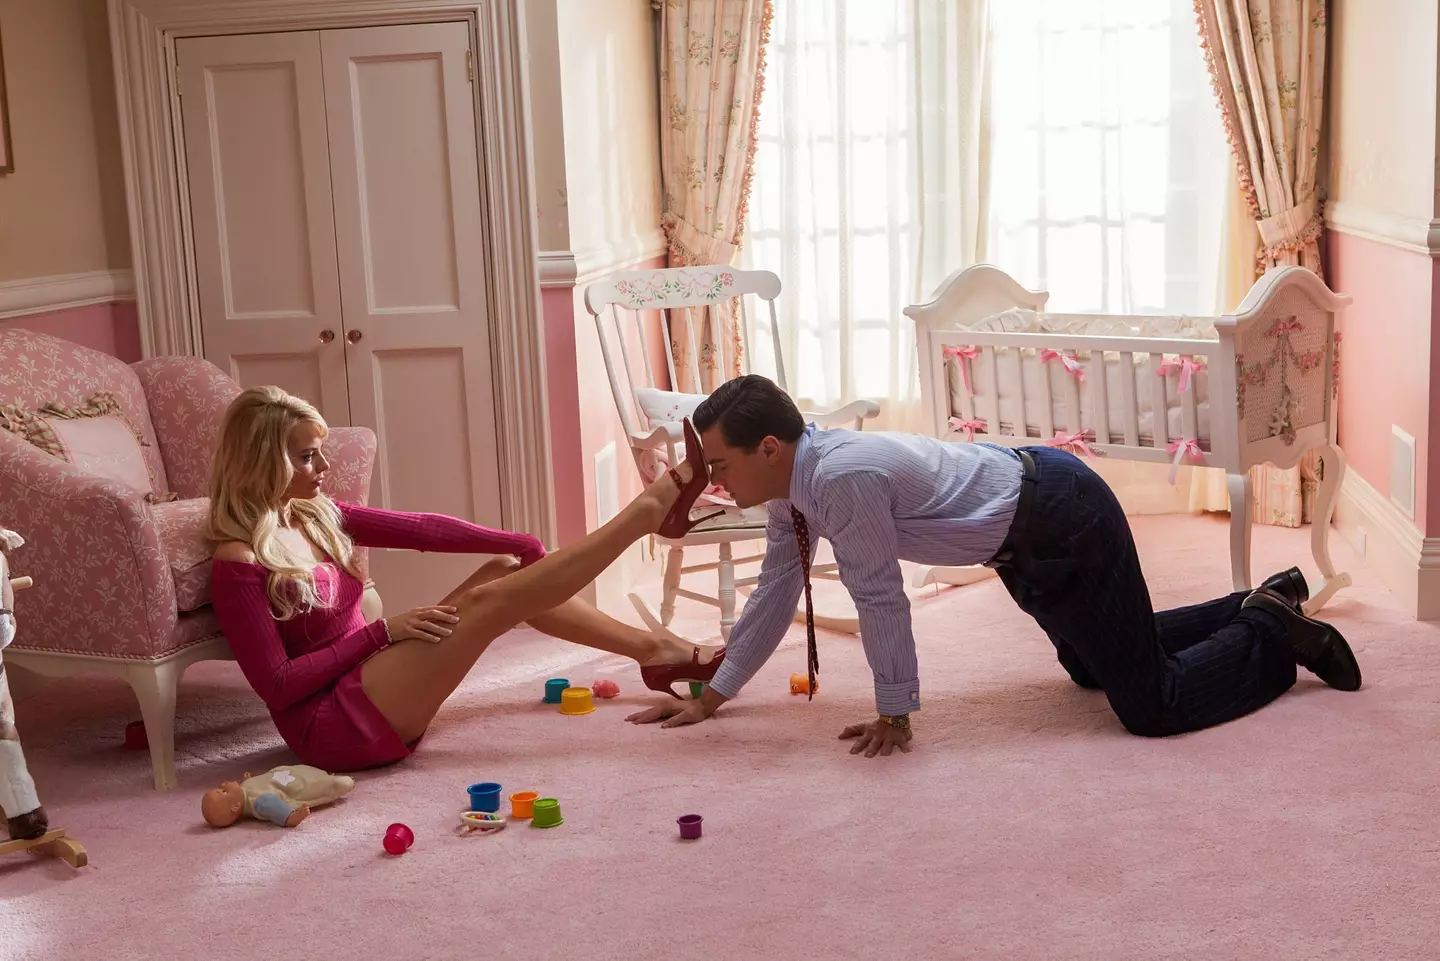 Margot Robbie has revealed a lot of behind-the-scenes secrets from The Wolf of Wall Street.